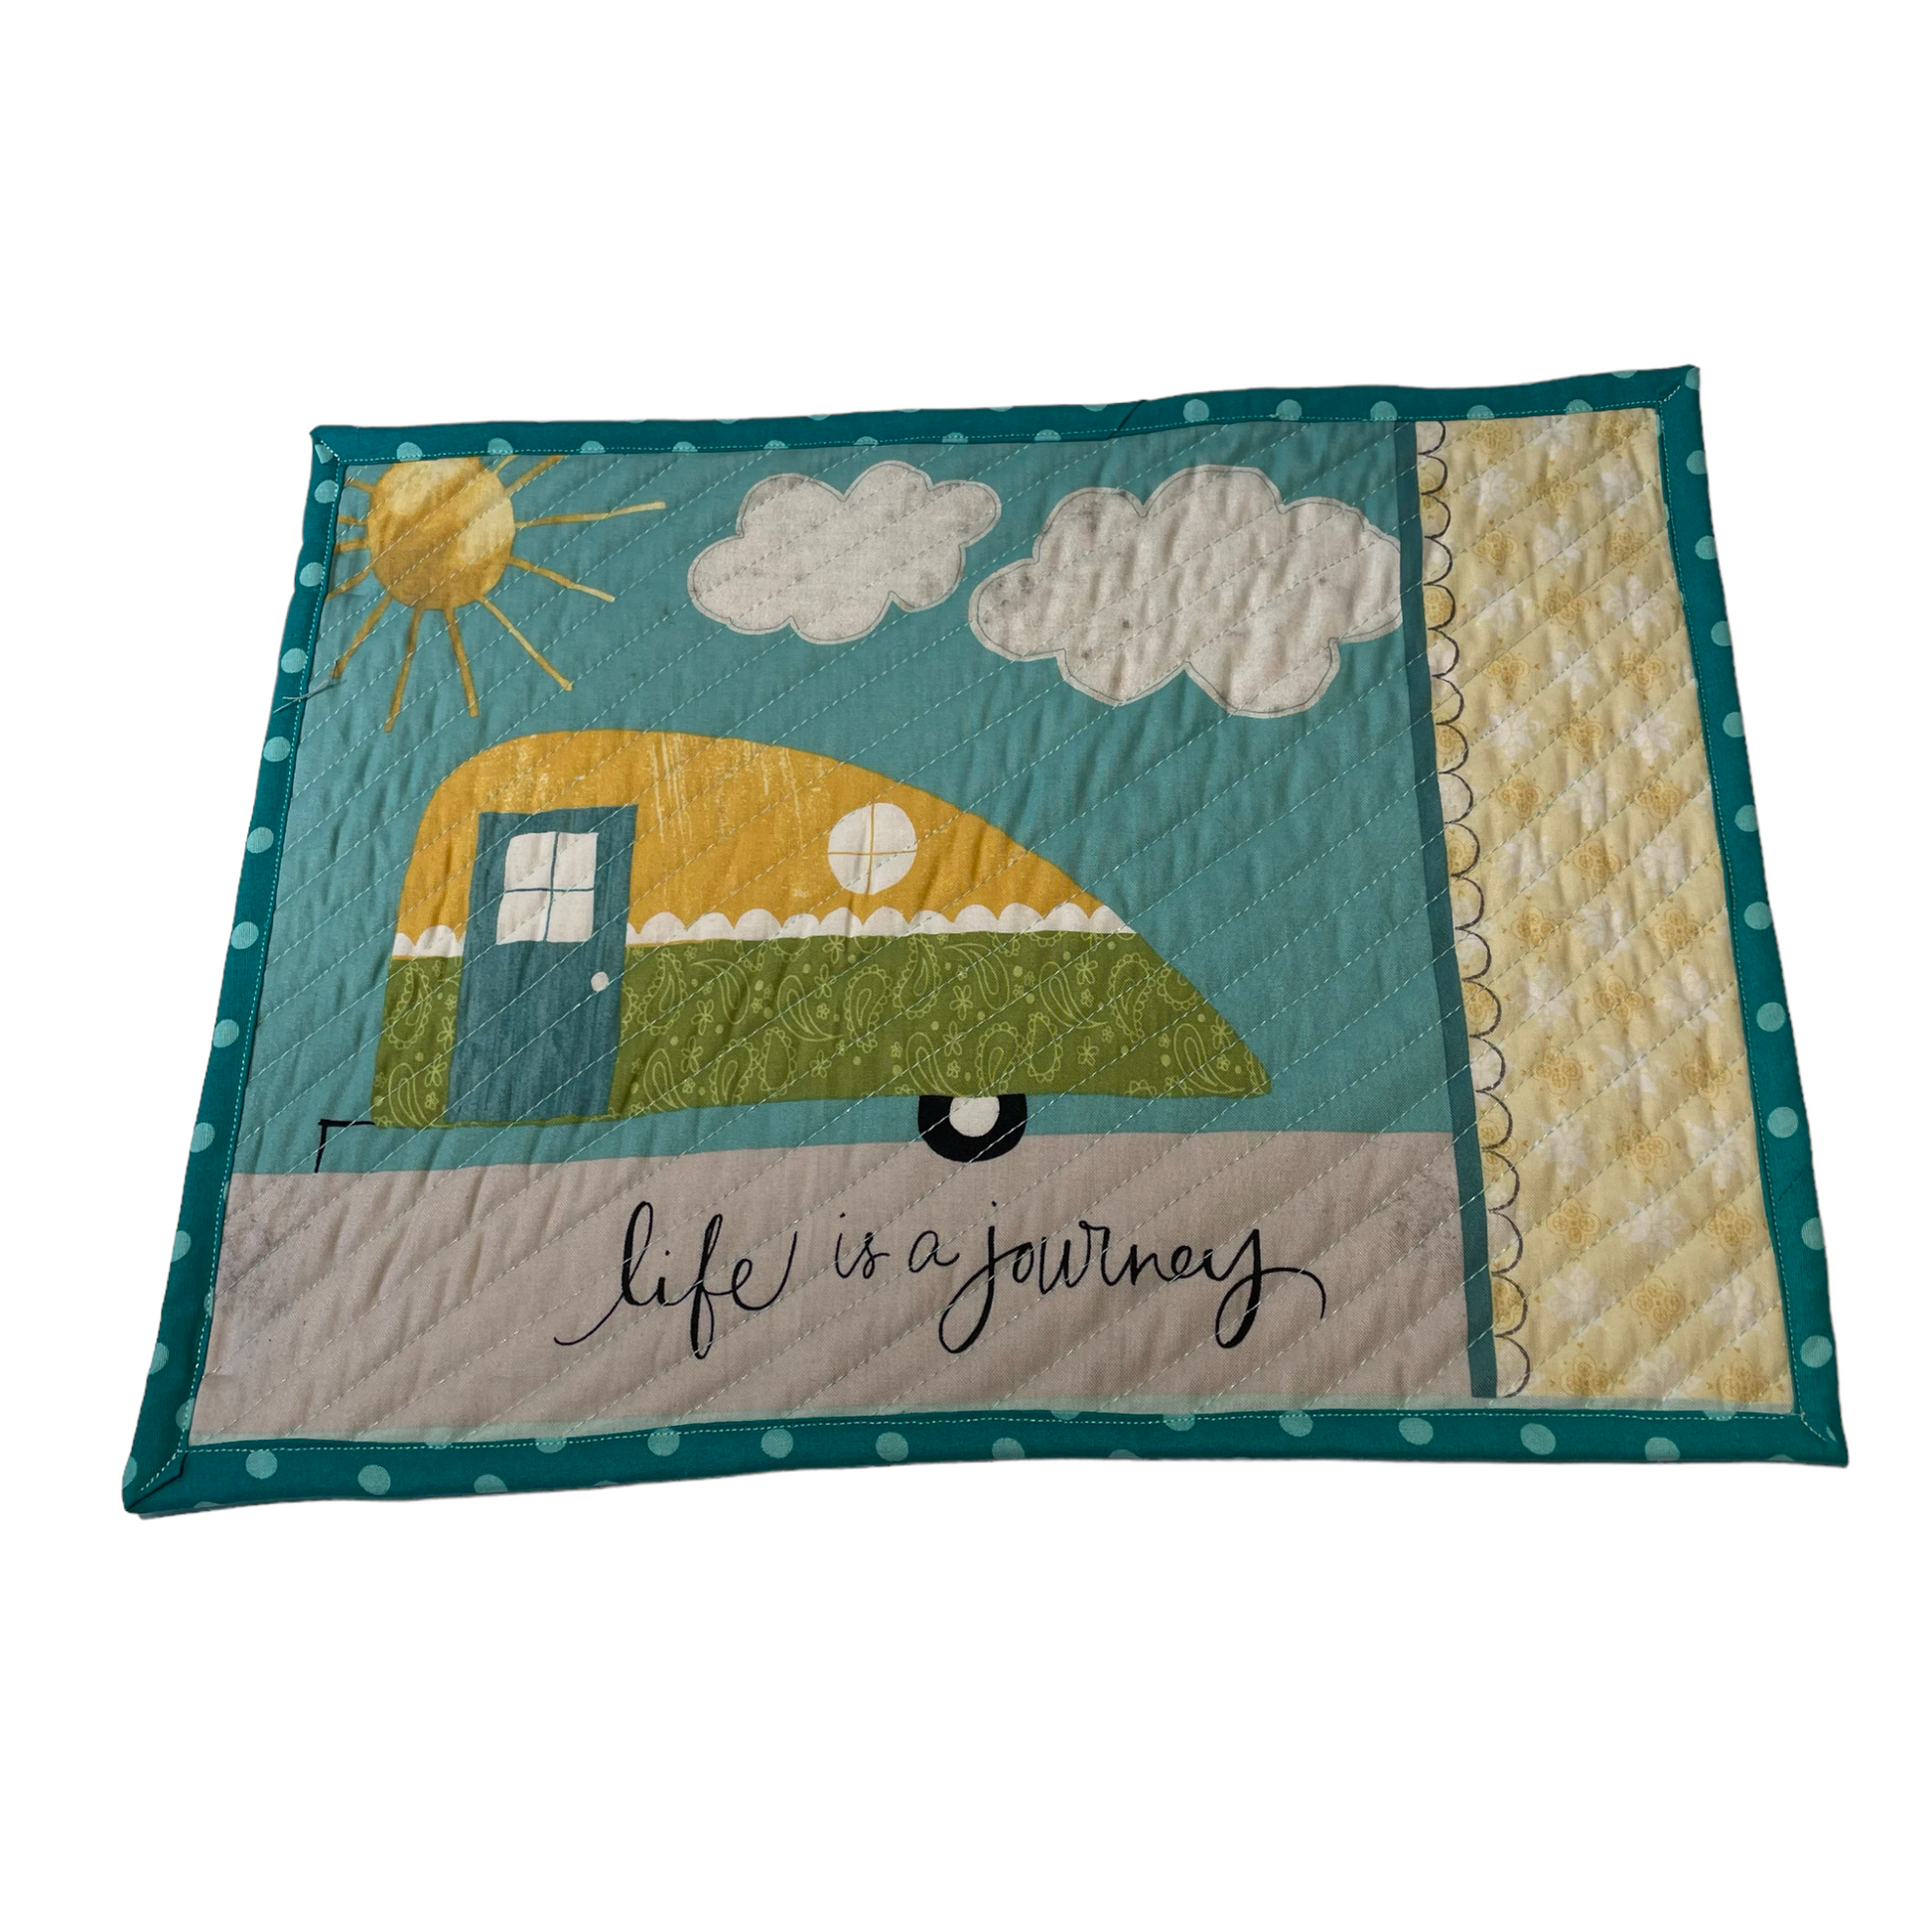 Quilting Camping Placemats - Home Stitchery Decor